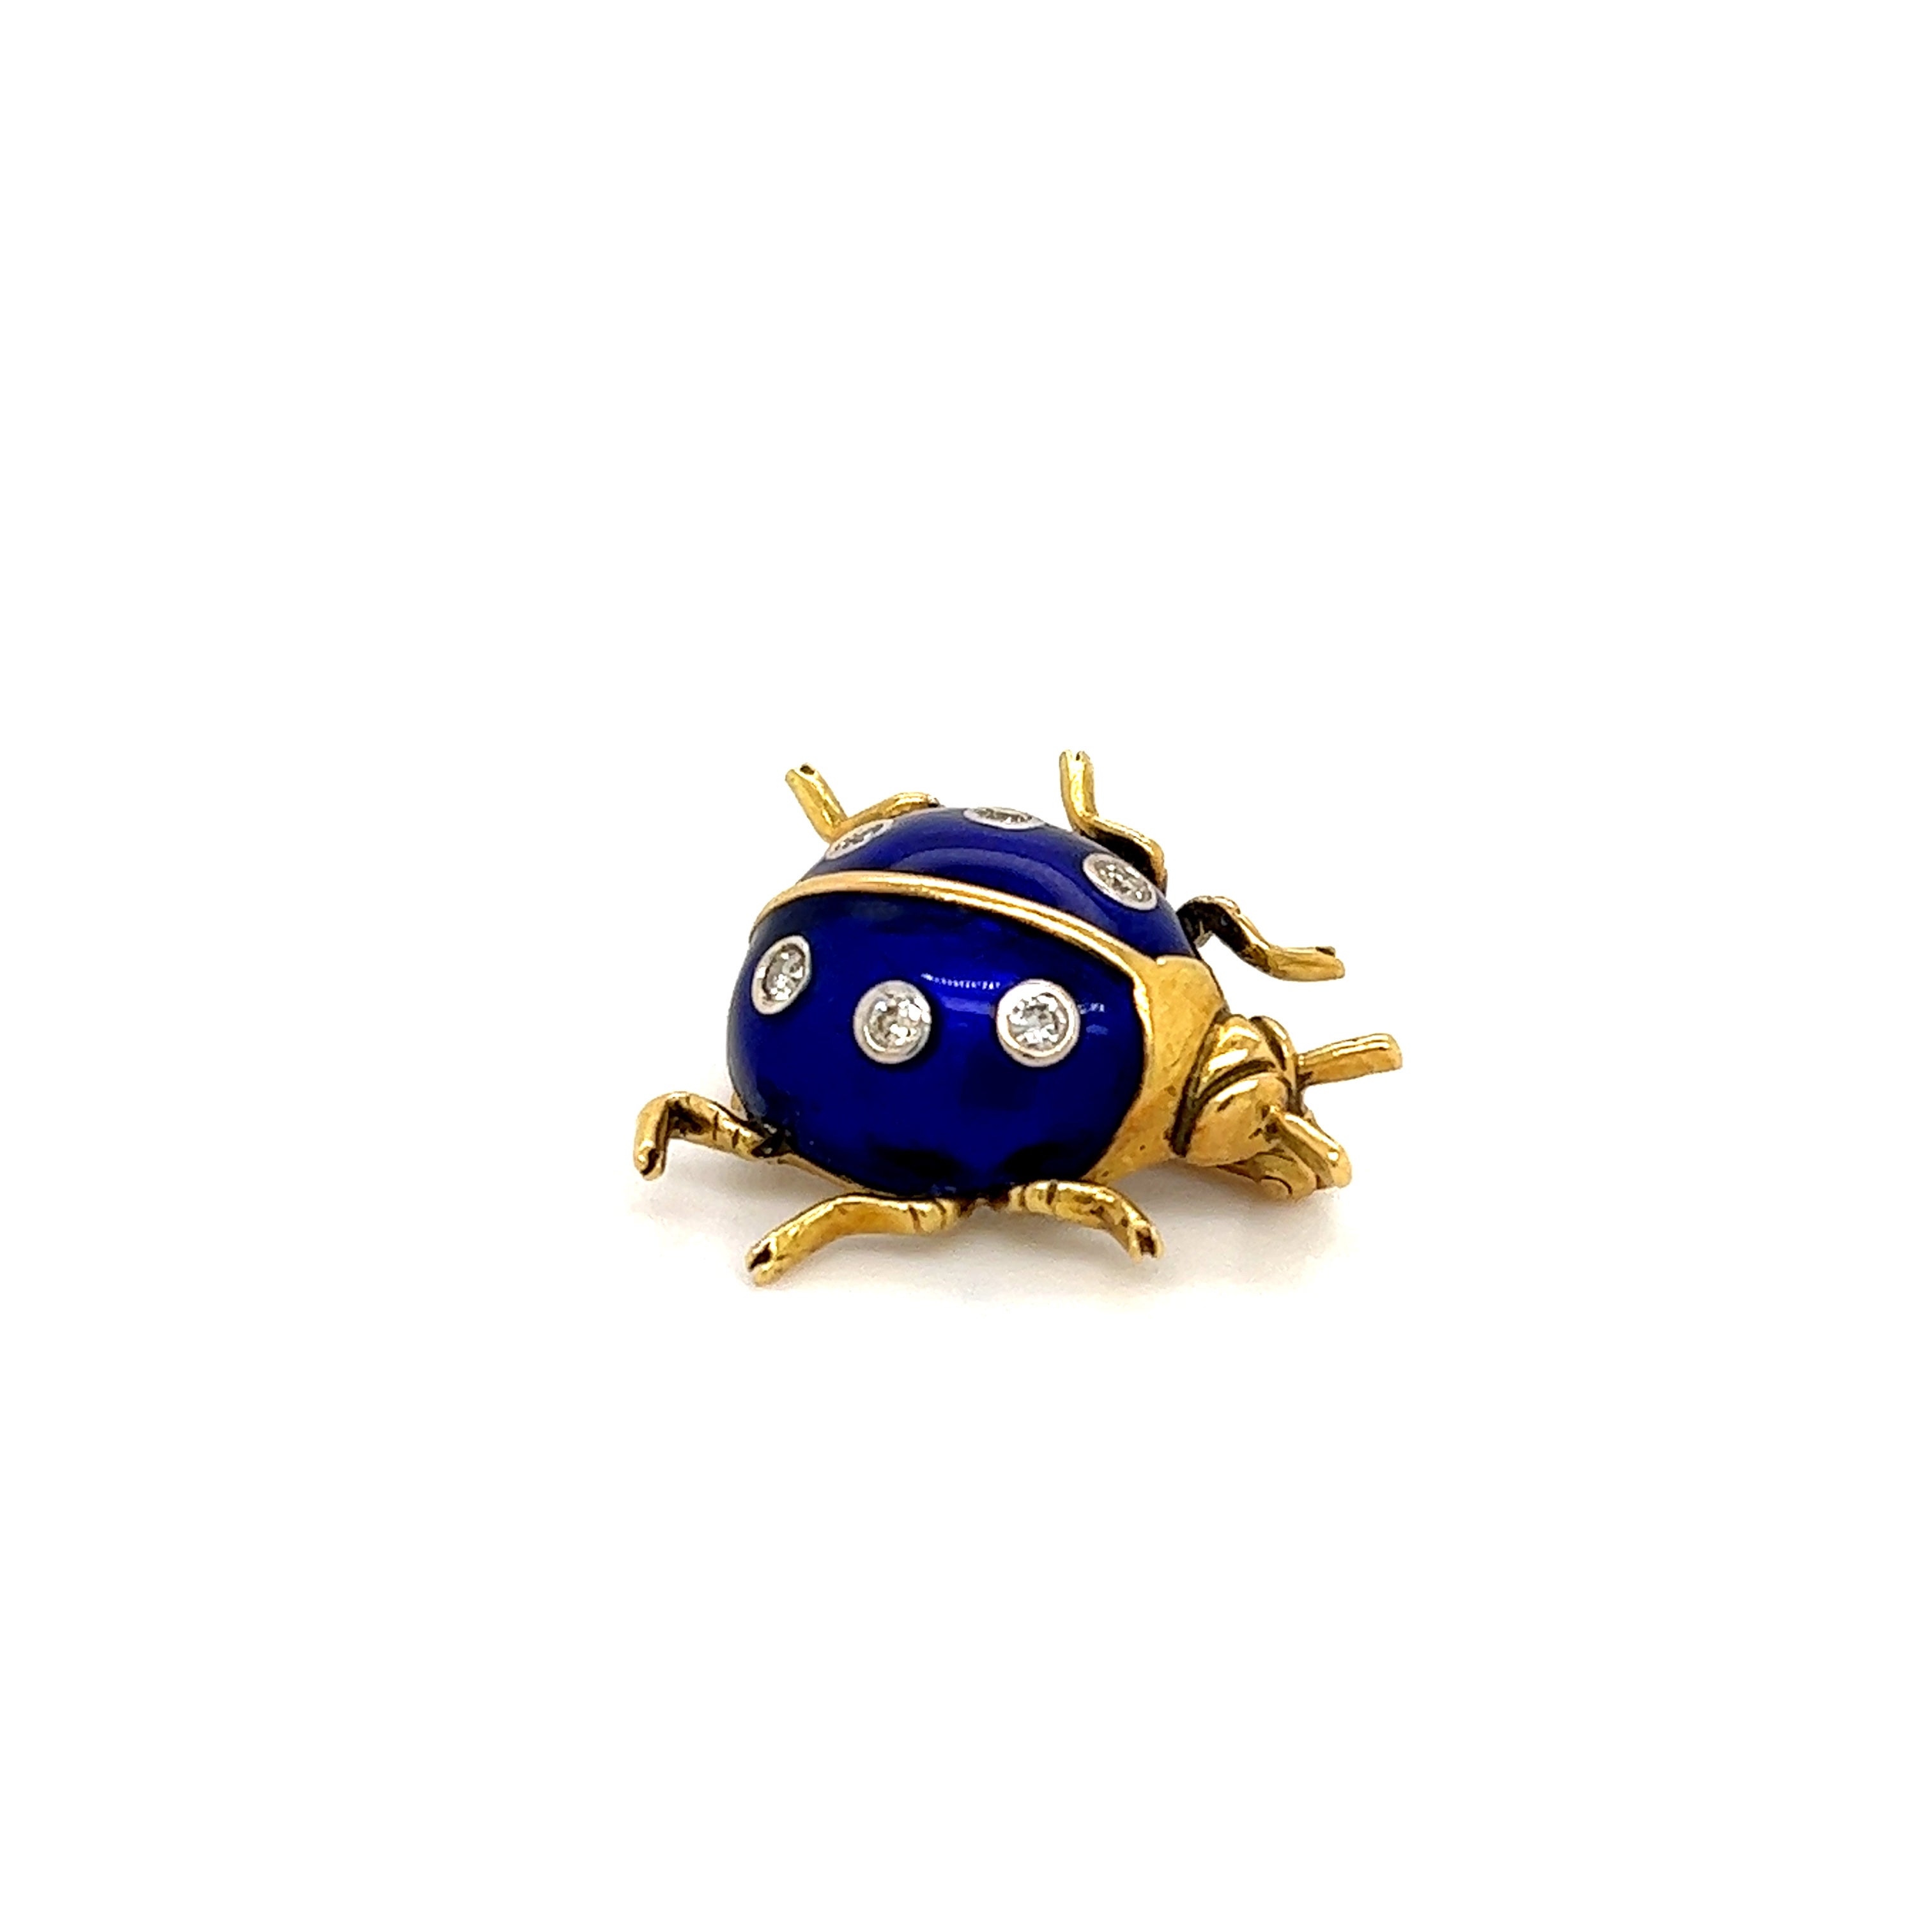 Beautifully crafted ladybug brooch in 18k yellow gold. The ladybug shows details throughout as it is highlighted with an electric colored cobalt blue enamel. Nestled within the enamel are six round brilliant cut diamonds. They add the perfect touch